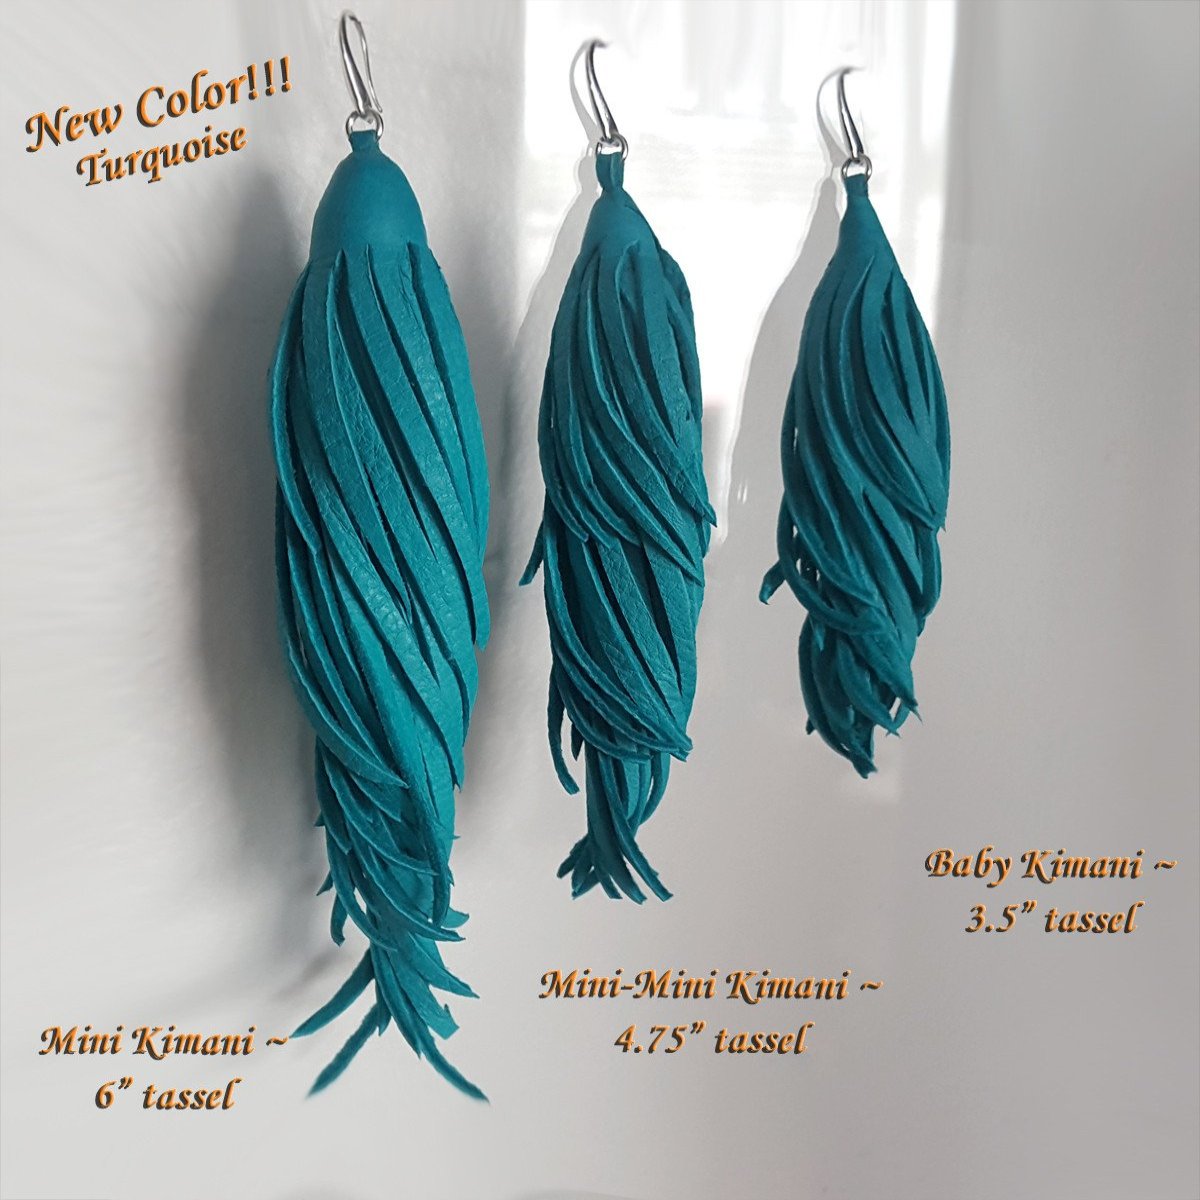 Kimani Leather Tassel Earrings in 4 lengths. New Color, Turquoise